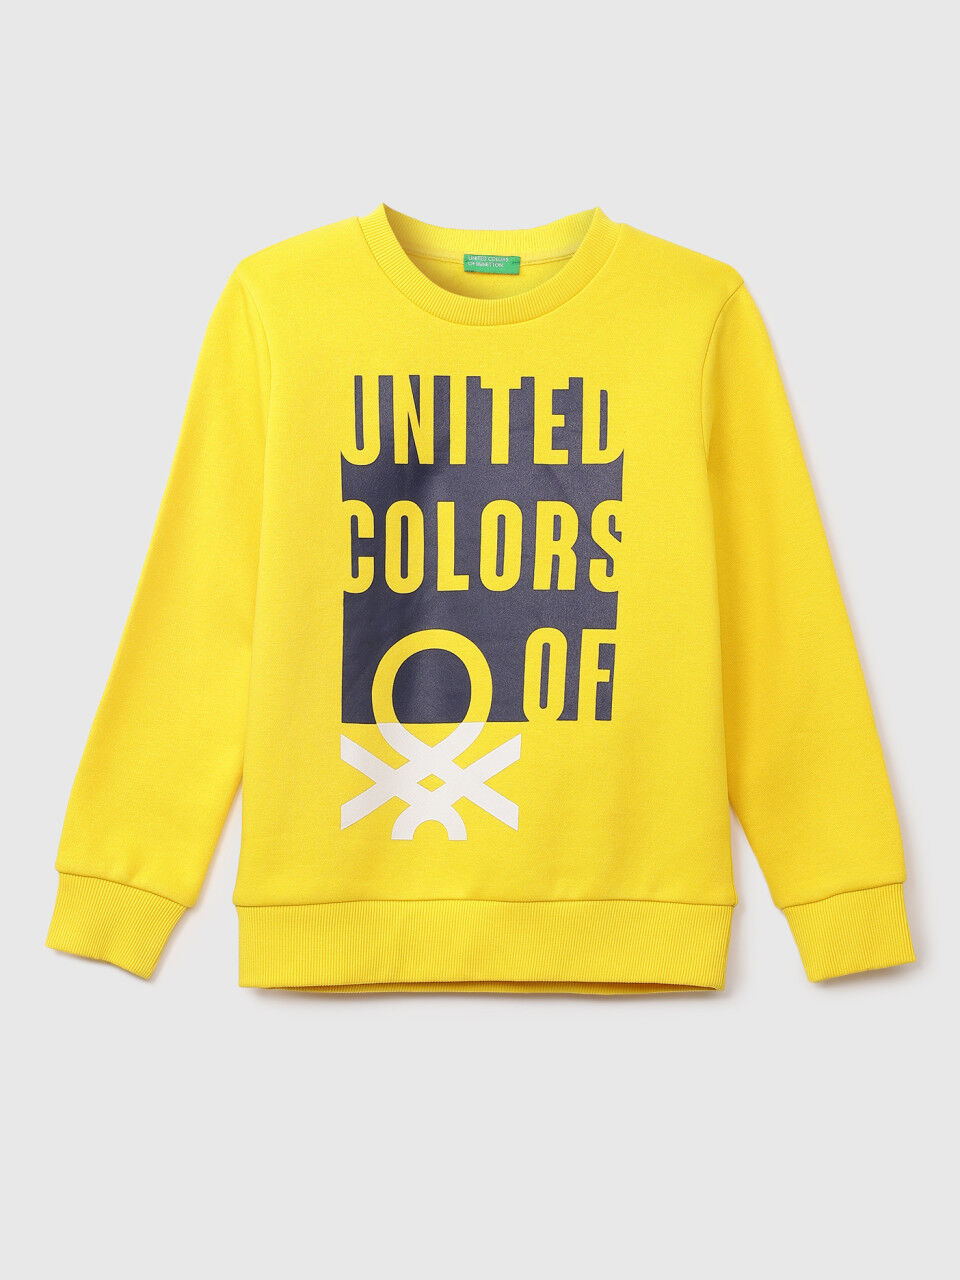 United Colors of Benetton Boys Giacca C/CAPP M/L Sweater 